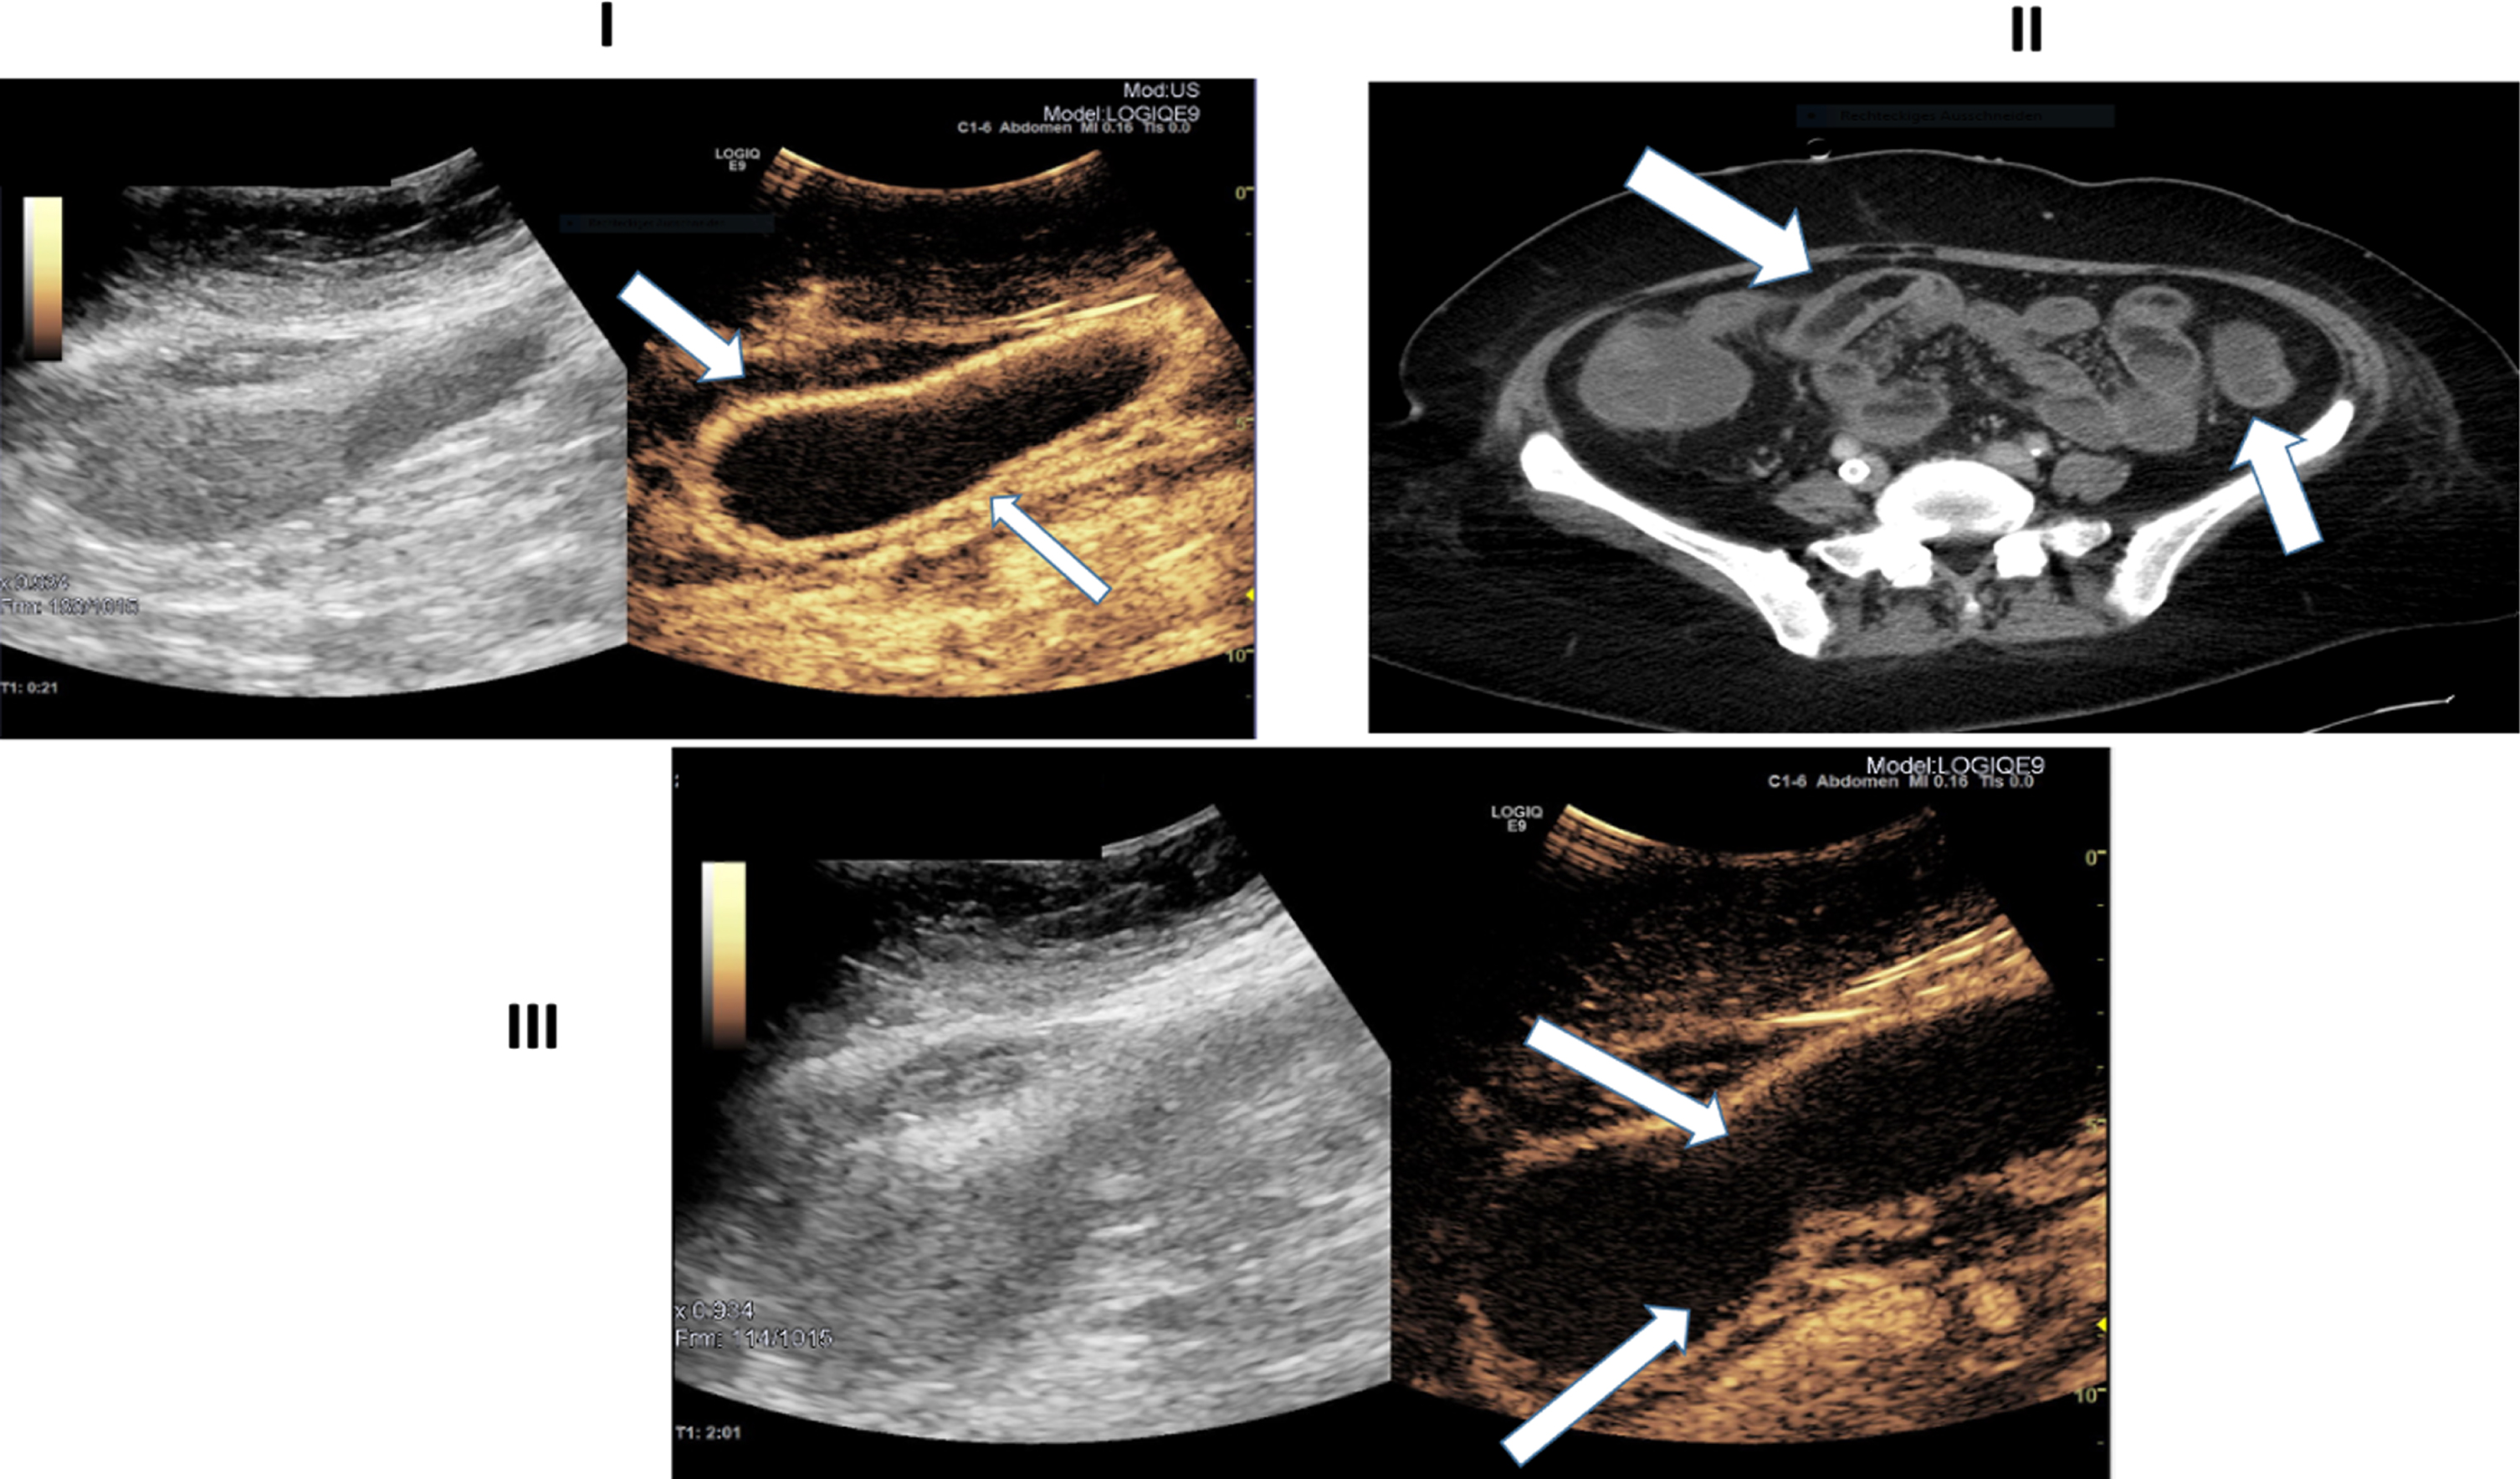 Ultrasound images of a 45-year-old patient with severe COVID-19 disease. I: B-Mode ultrasound showing intestinal wall thickening. CEUS image manifesting early and strong arterial hyperenhancement of the intestinal wall (white arrows) 21 seconds after SonoVue application. II: Computertomography (CT) image depicting bowel wall edema and contrast enhancement of the bowel wall (white arrows). III: CEUS imaging expressing transmural penetration of microbubbles (white arrows).